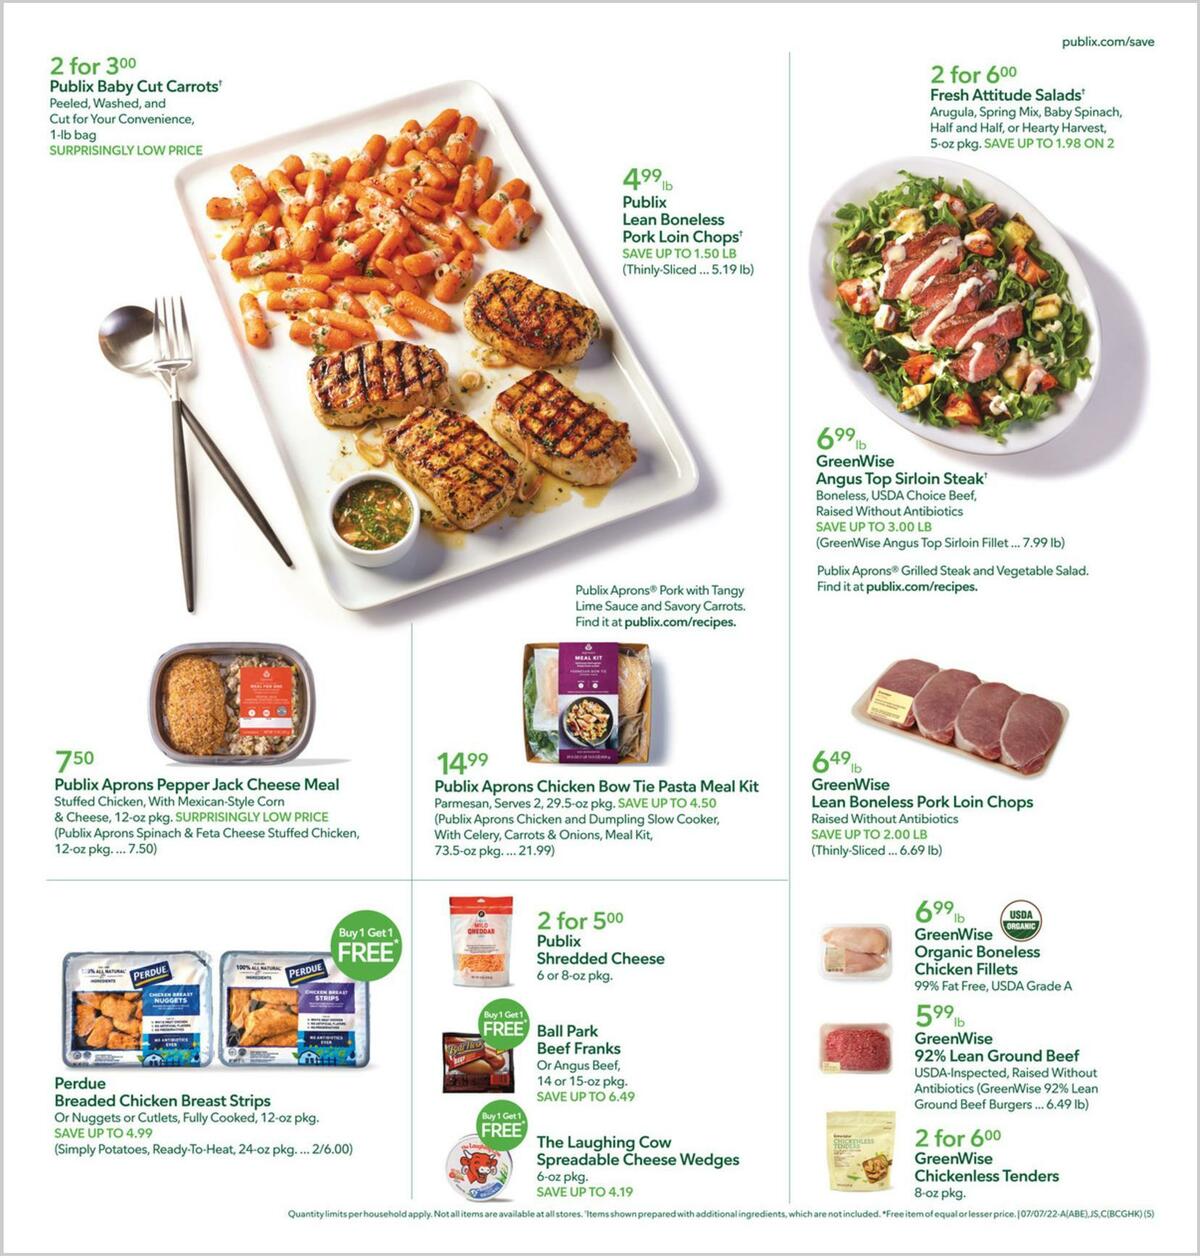 Publix Weekly Ad from July 6